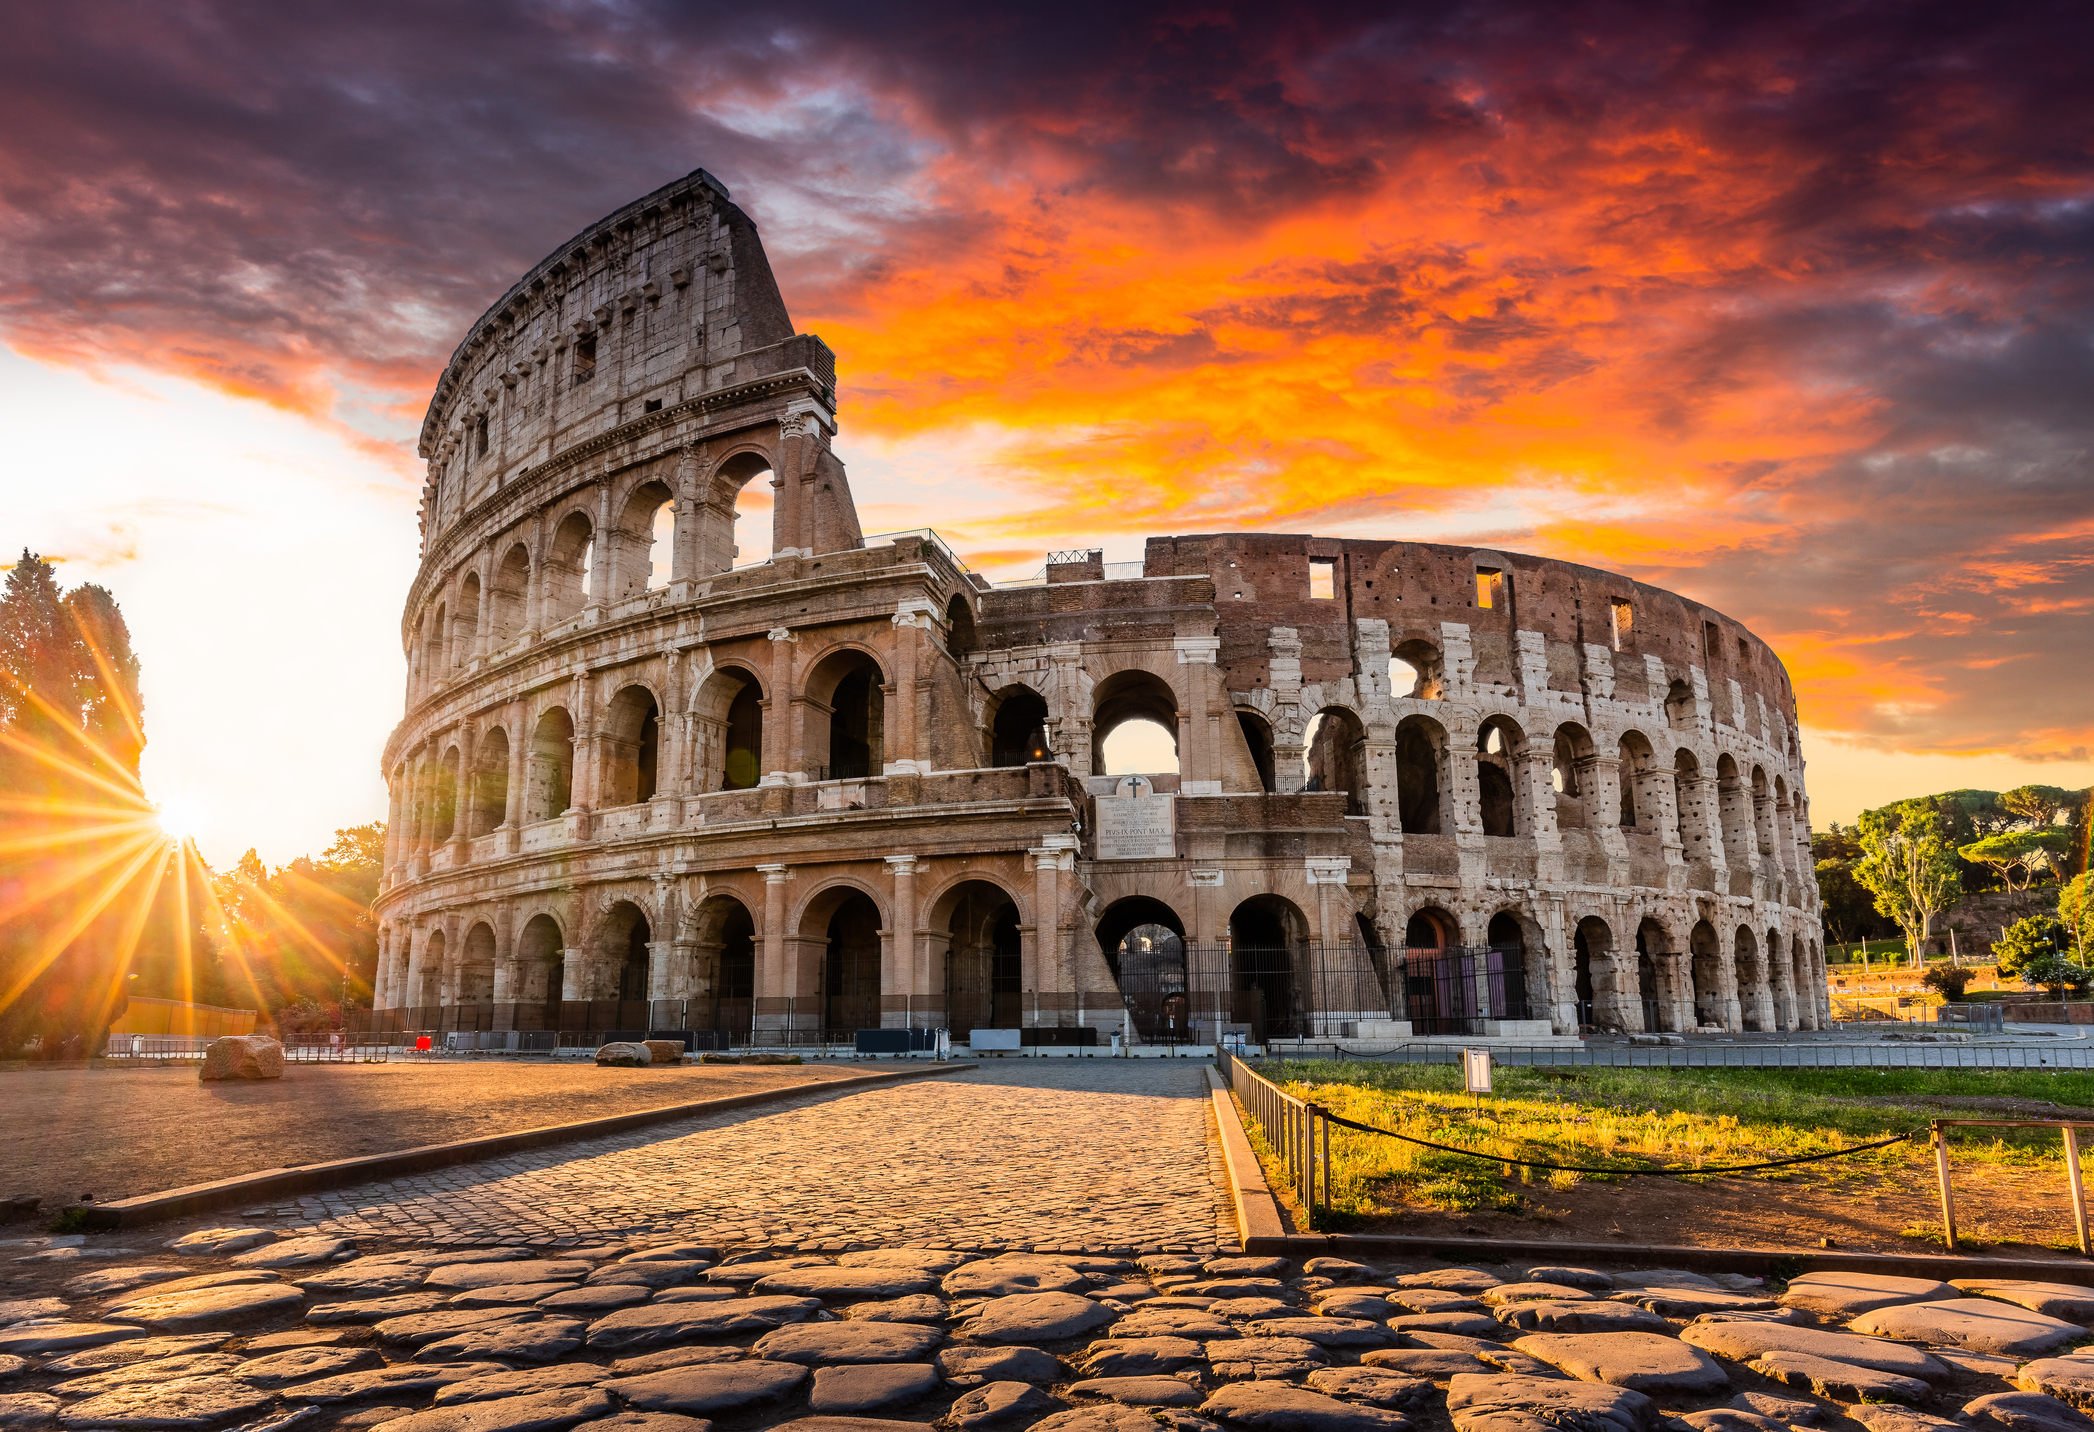 7-night Rome, Florence & Venice tour with air from $1,099